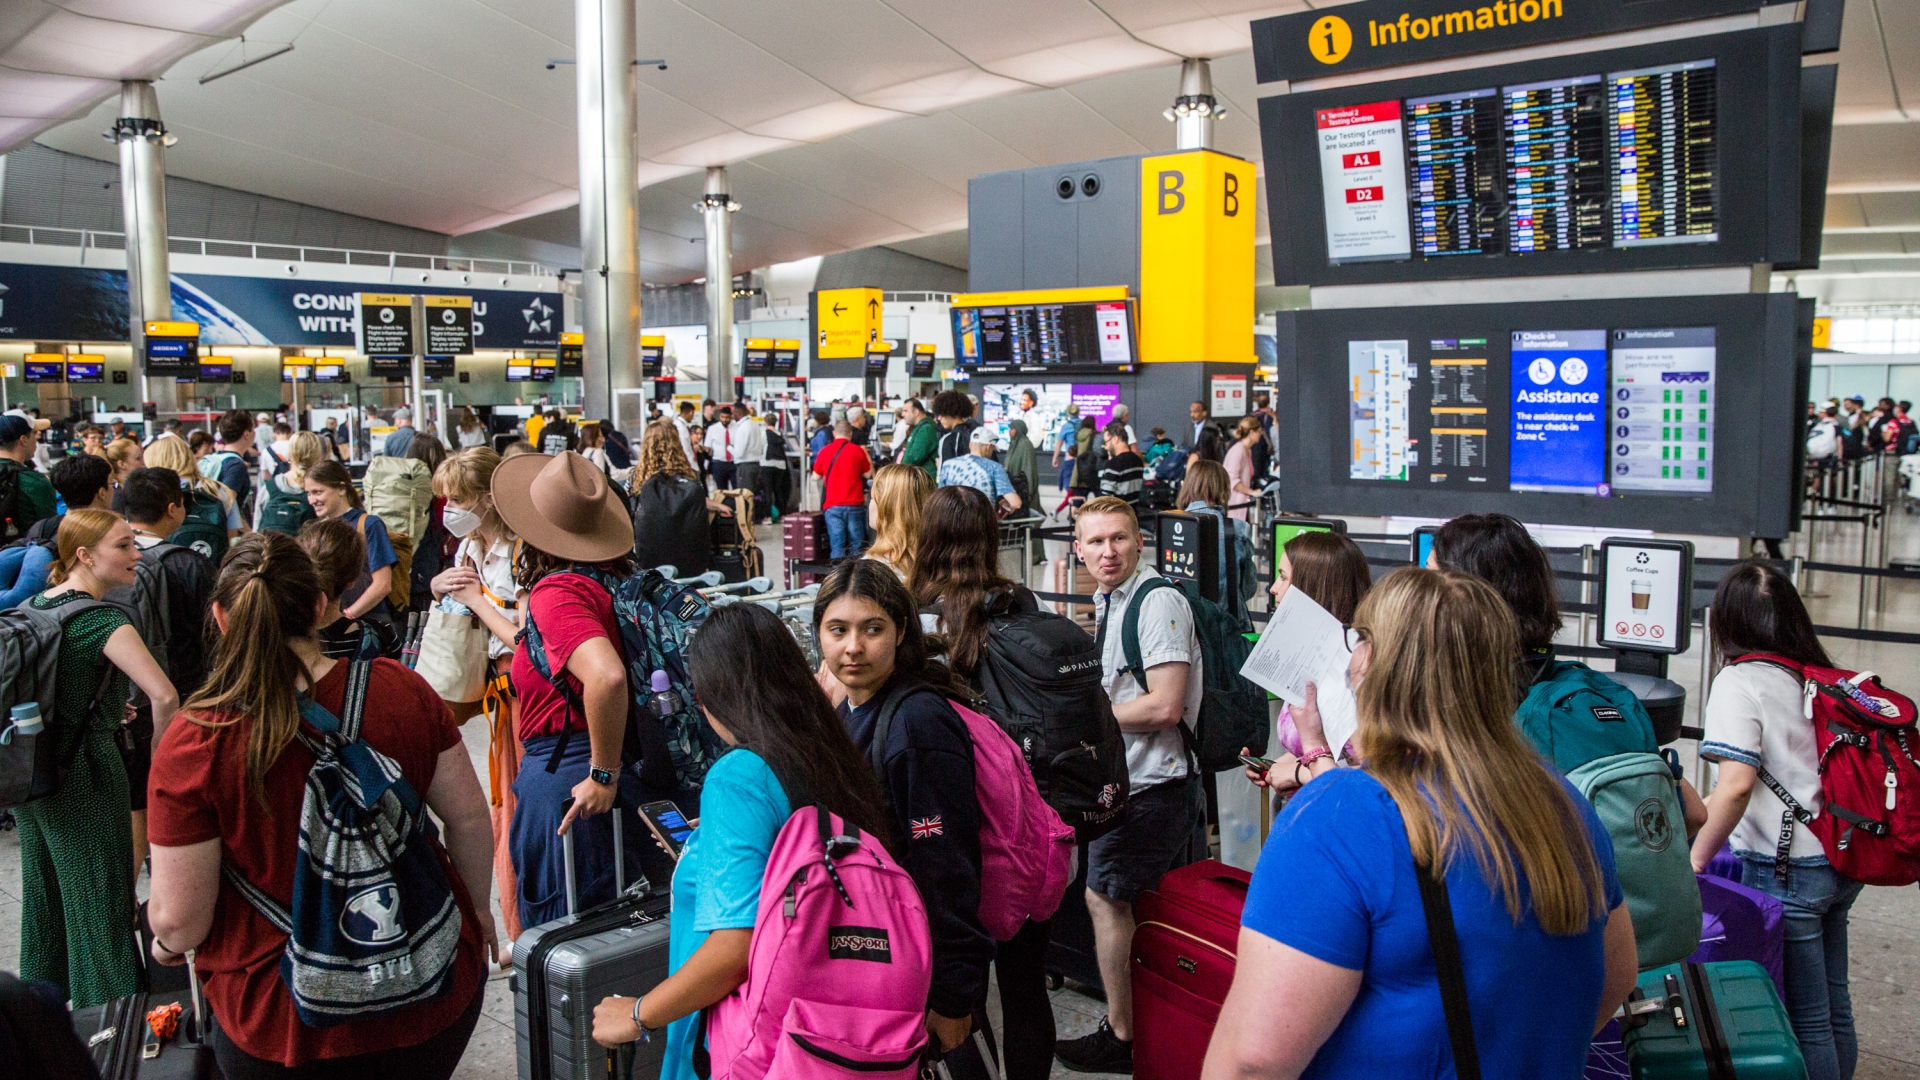 Ryanair boss warns that holidaymakers face the ‘worst travel disruption’ in Europe this year